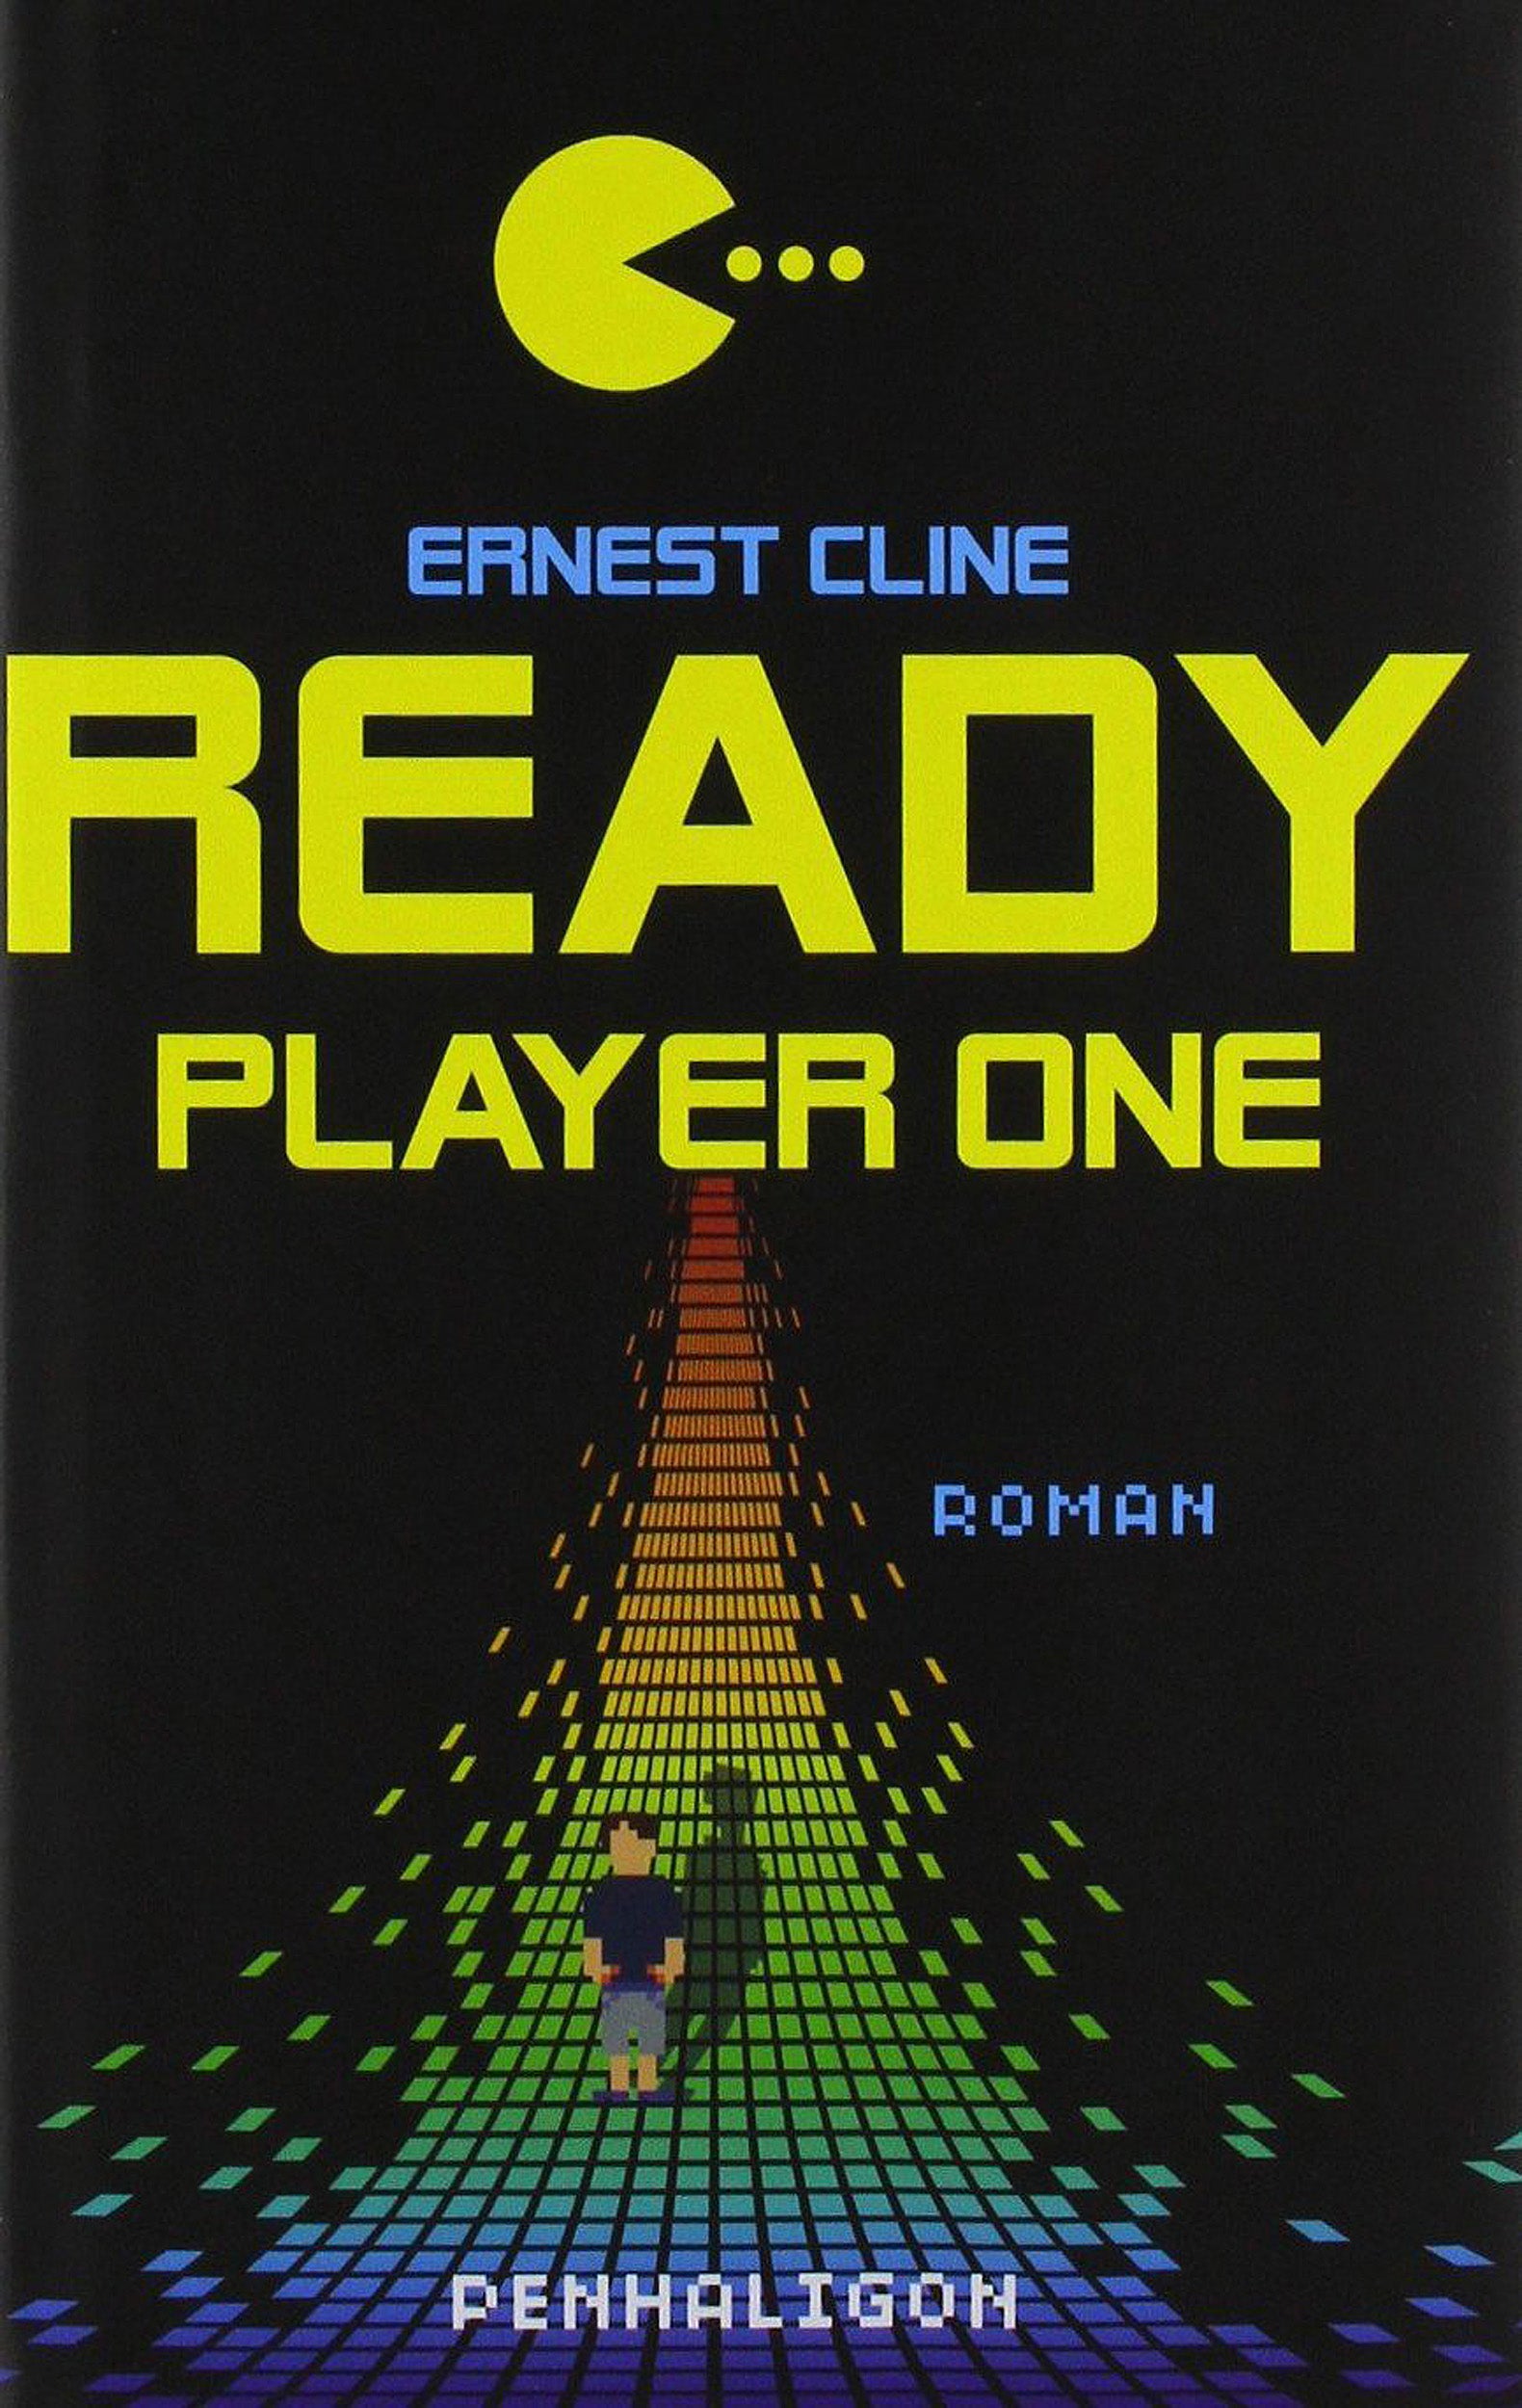 Cover of “Ready Player One” by Ernest Cline.